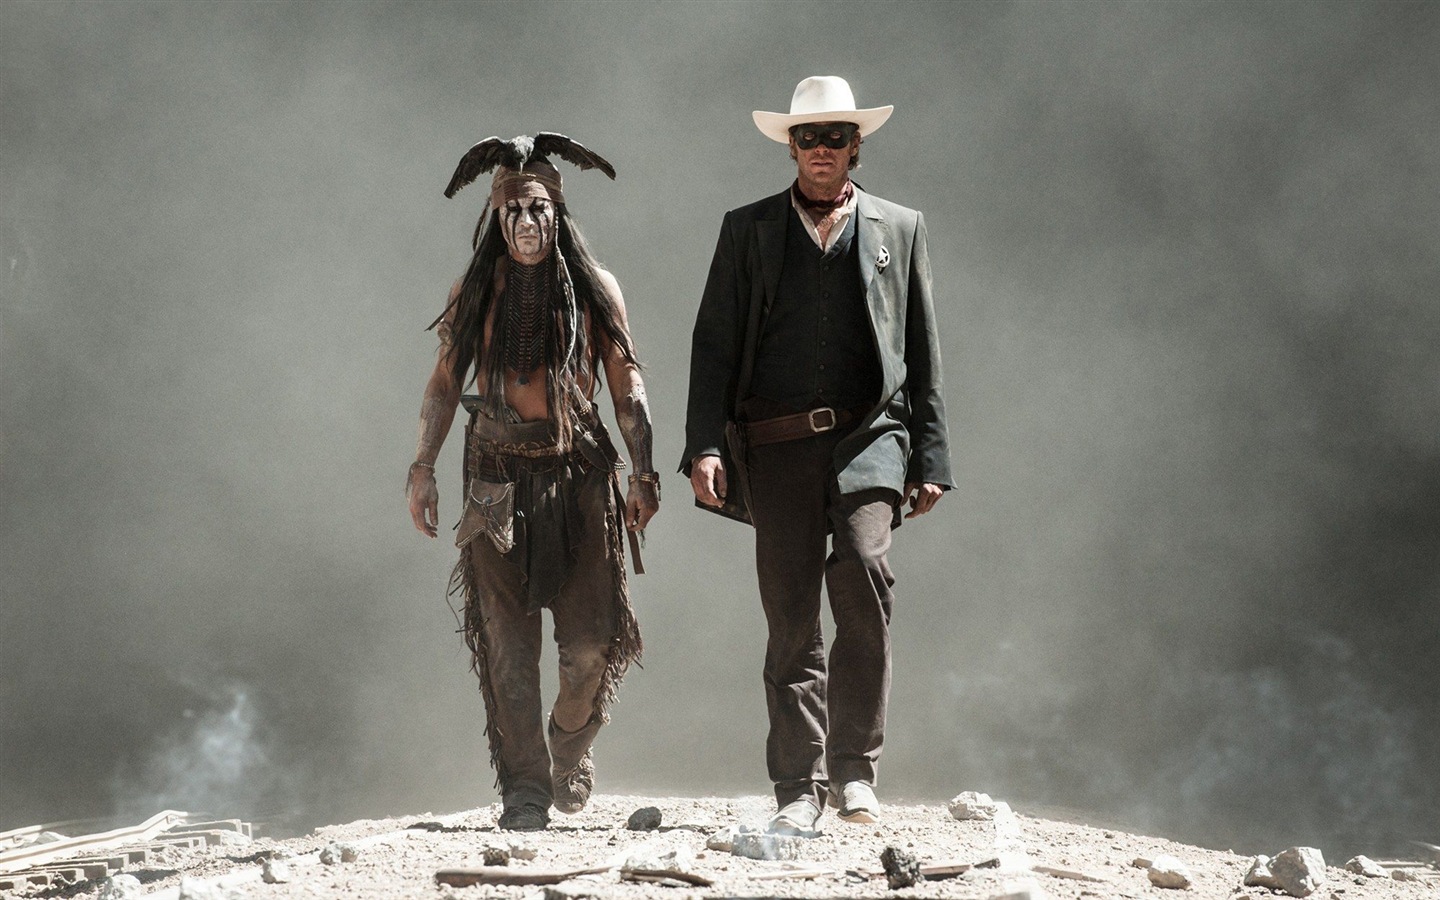 The Lone Ranger HD movie wallpapers #4 - 1440x900